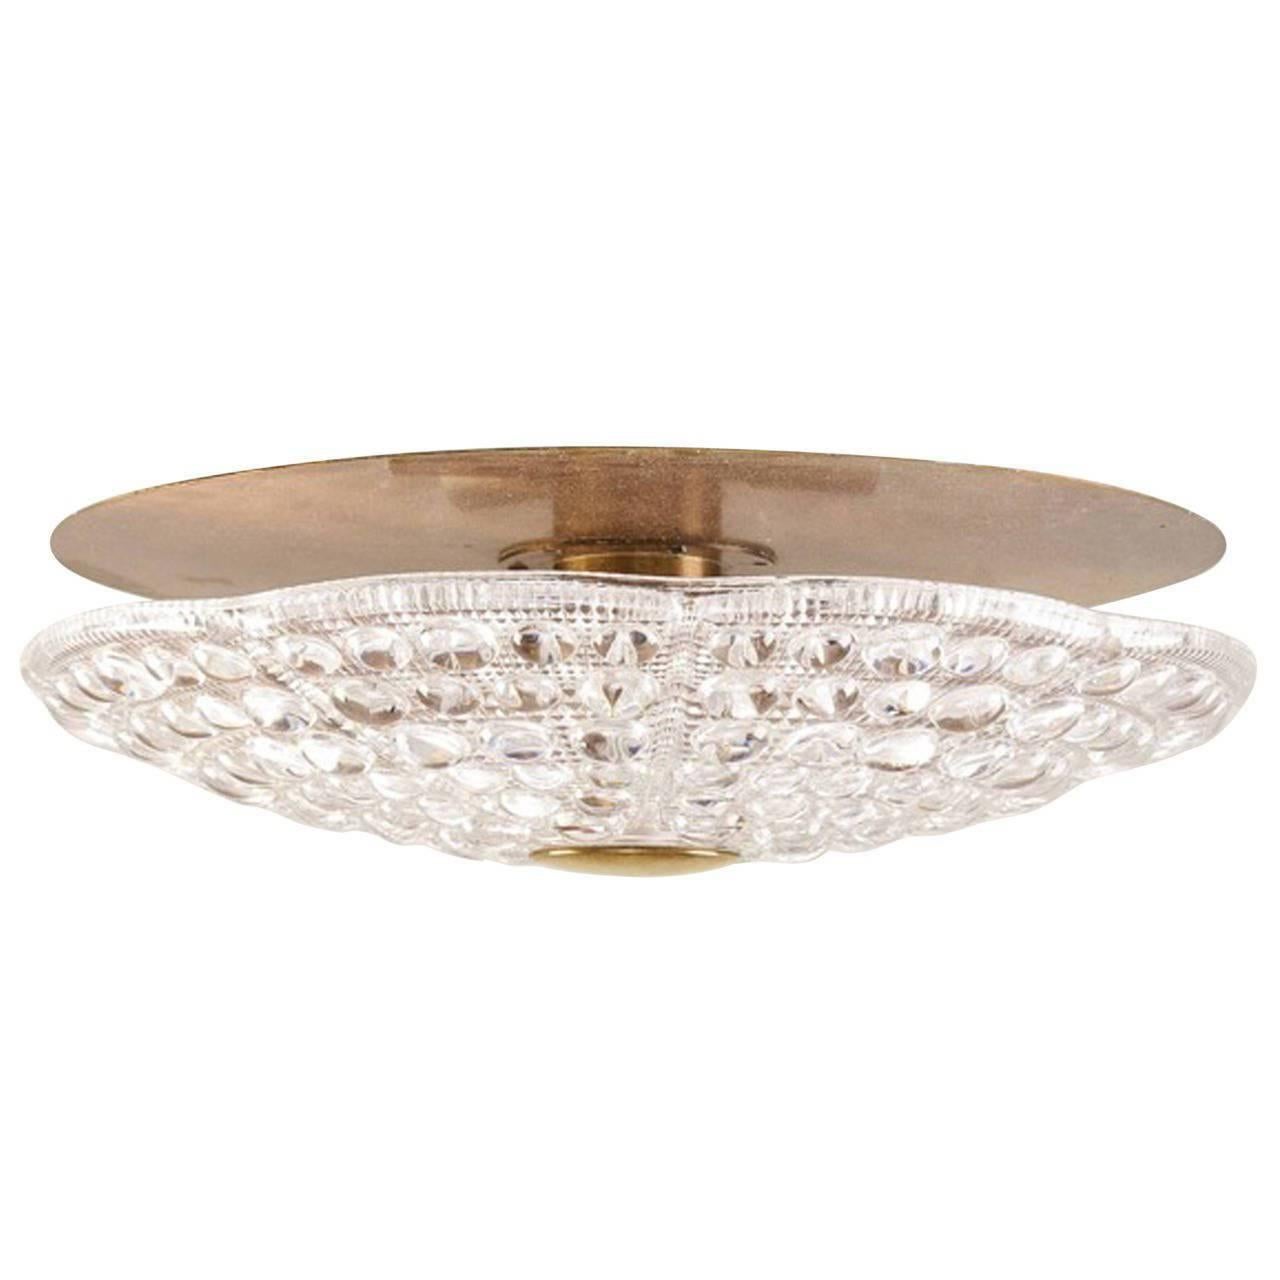 Ceiling Fixture of Pressed Glass and Brass by Orrefors